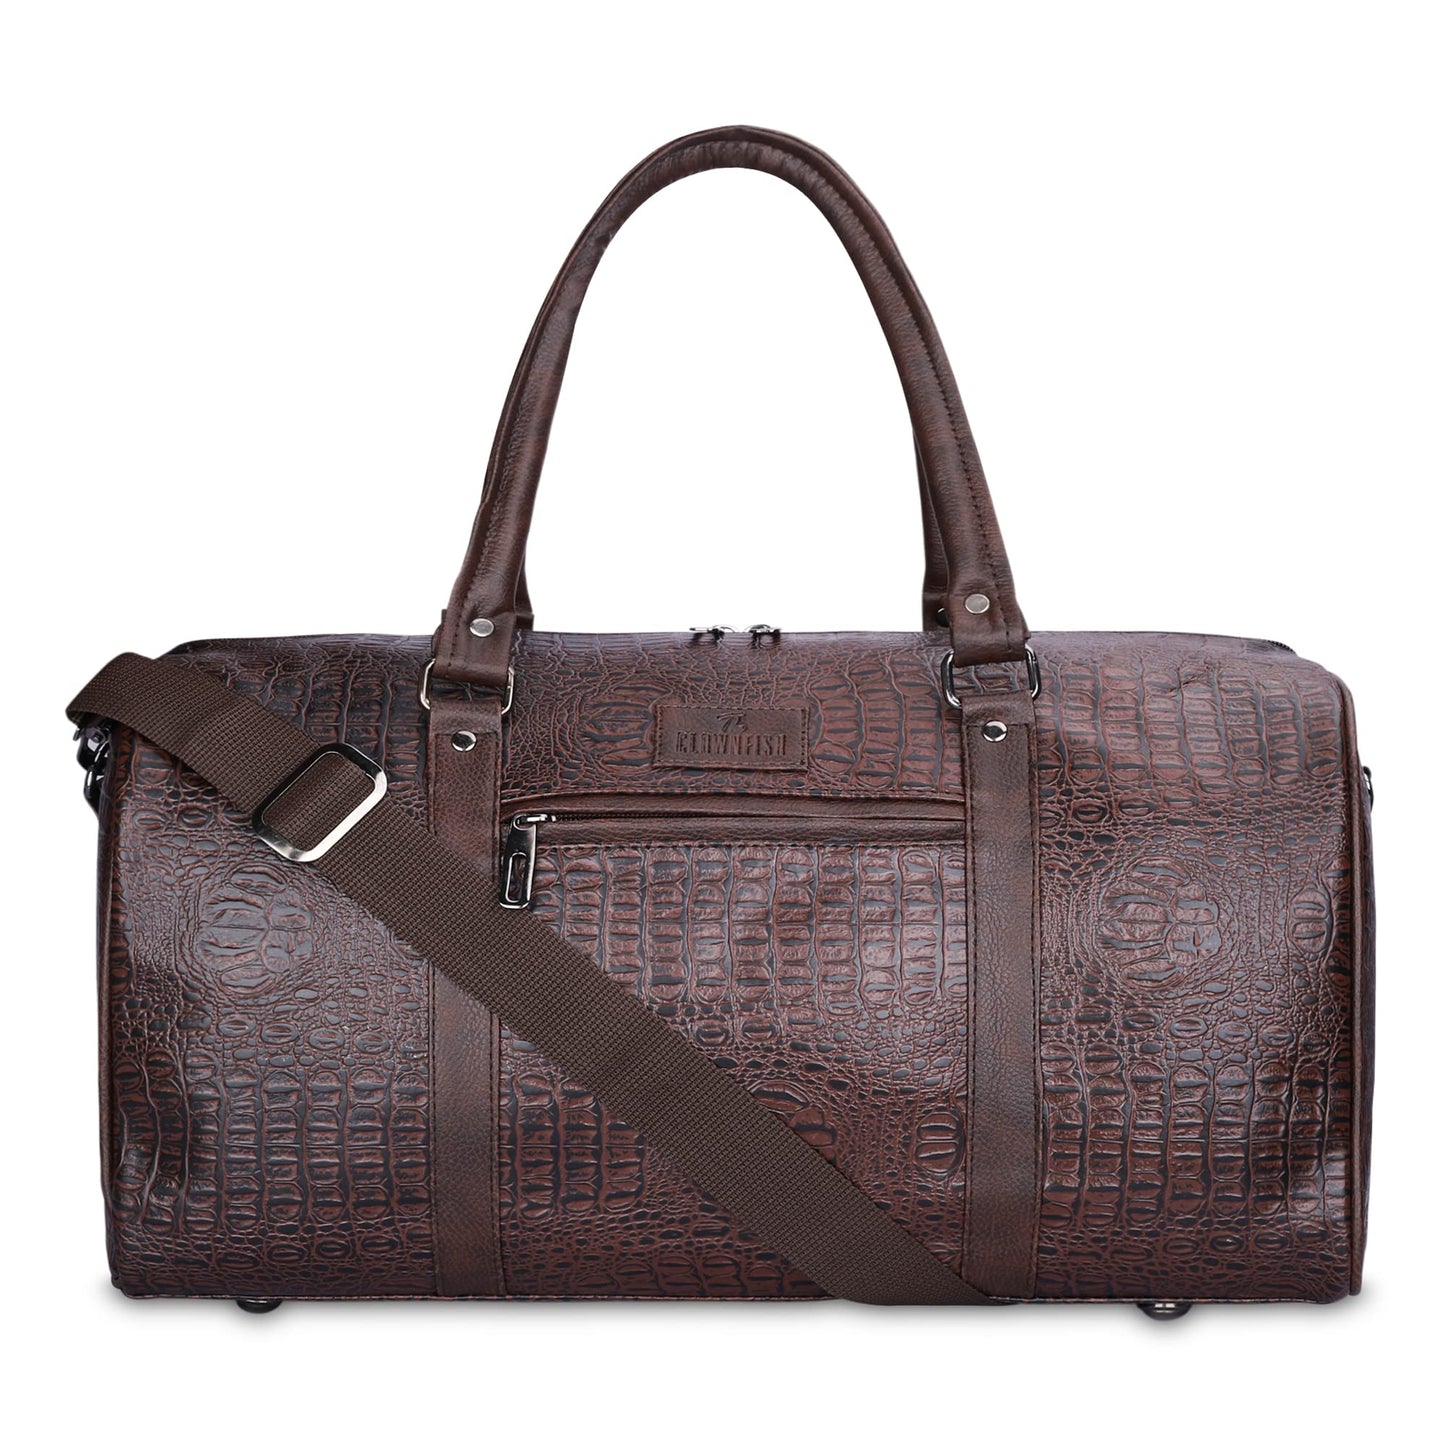 The Clownfish Expedition Series 29 litres Faux Leather Crocodile Finish Unisex Travel Duffle Bag Weekender Bag (Dark Brown)